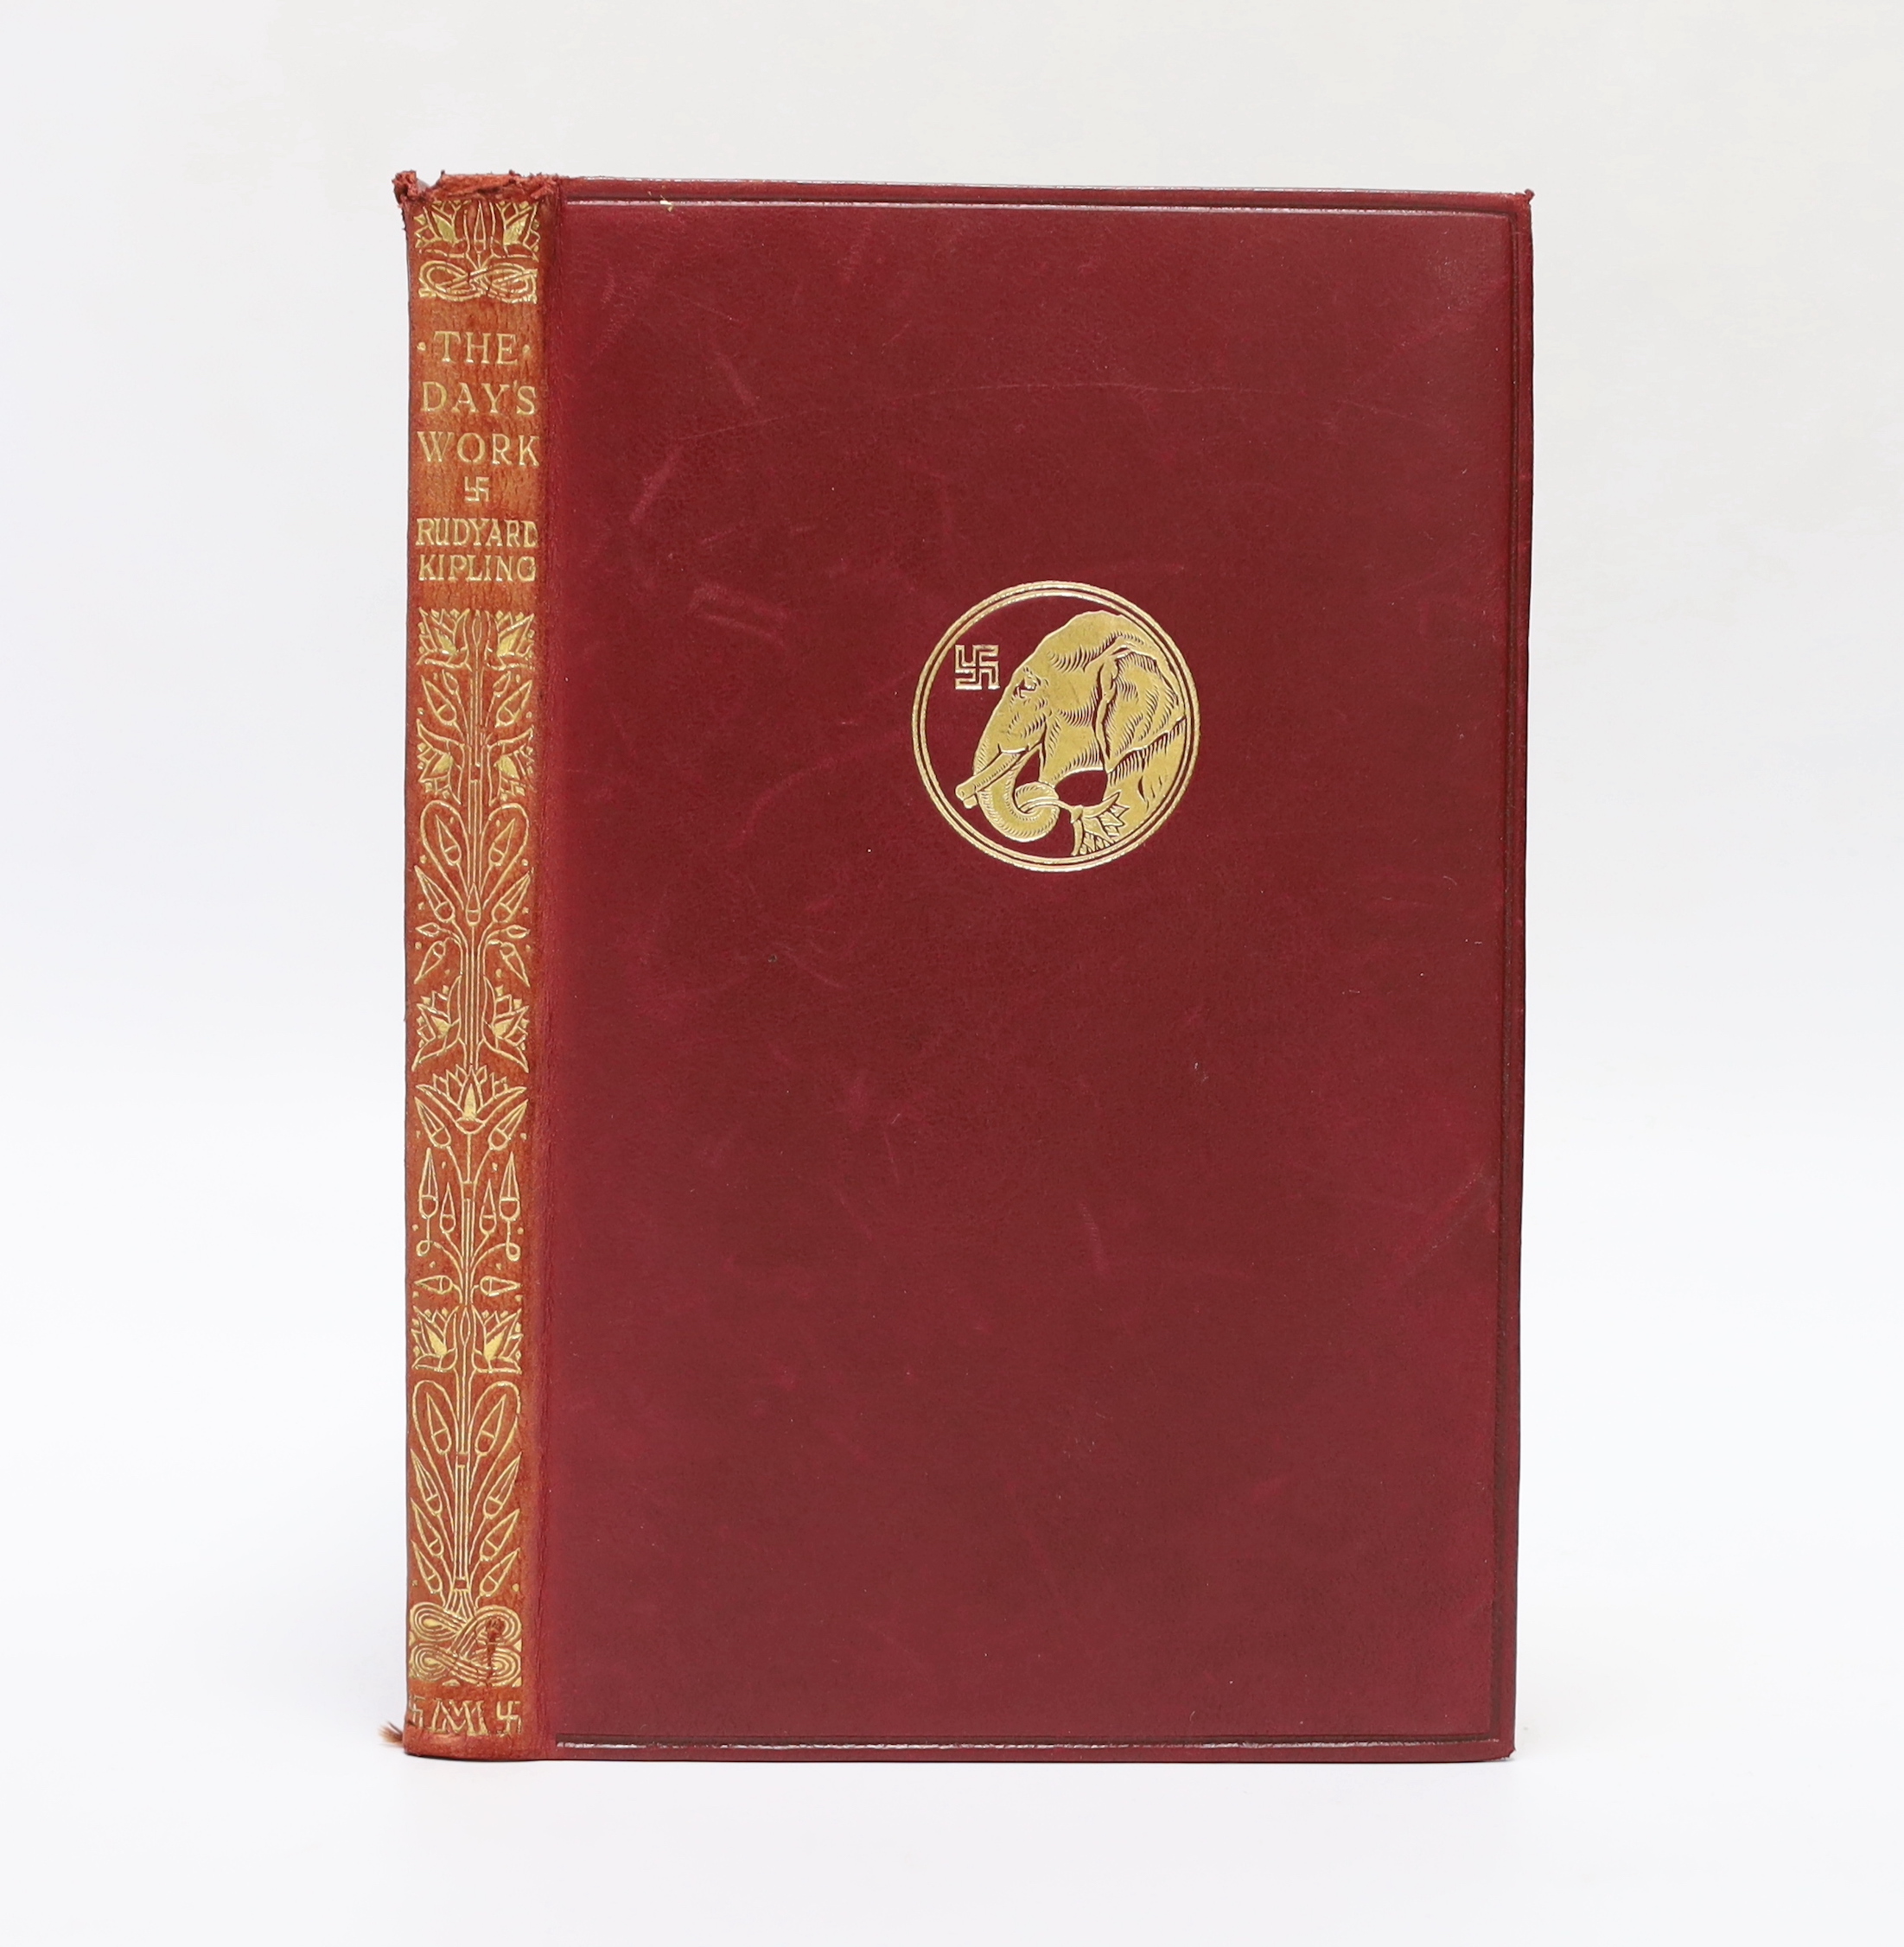 Kipling, Rudyard - The Day's Work. Pocket Edition, inscribed by author on title: 'G.J. Nicol./from/The author' at head; with author's printed name crossed through and Kipling's signature in centre. publisher's gilt decor